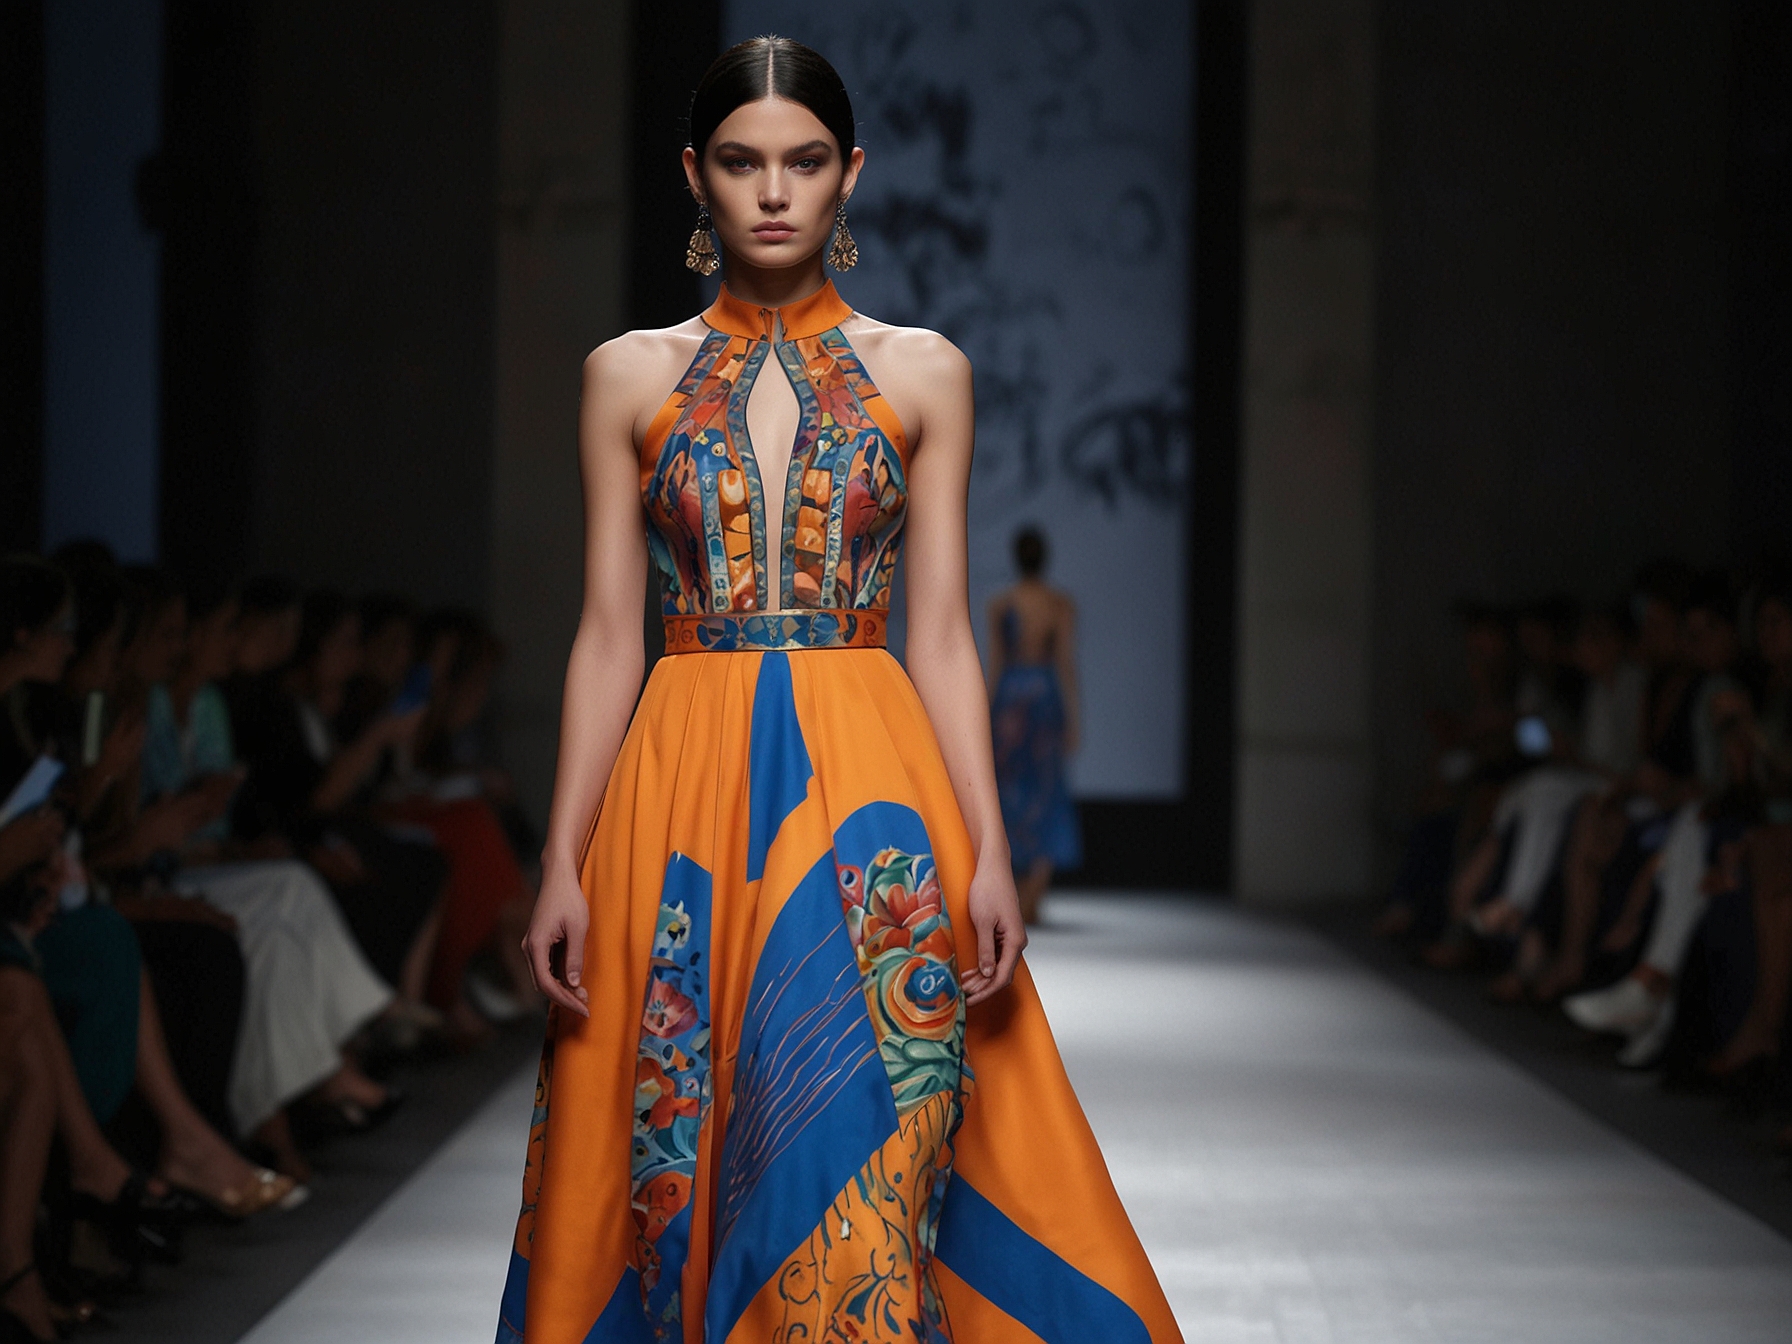 Dhruv Kapoor presents his latest collection at Milan Fashion Week, featuring avant-garde silhouettes and bold colors. The models showcase garments that blend traditional Indian craftsmanship with modern design.